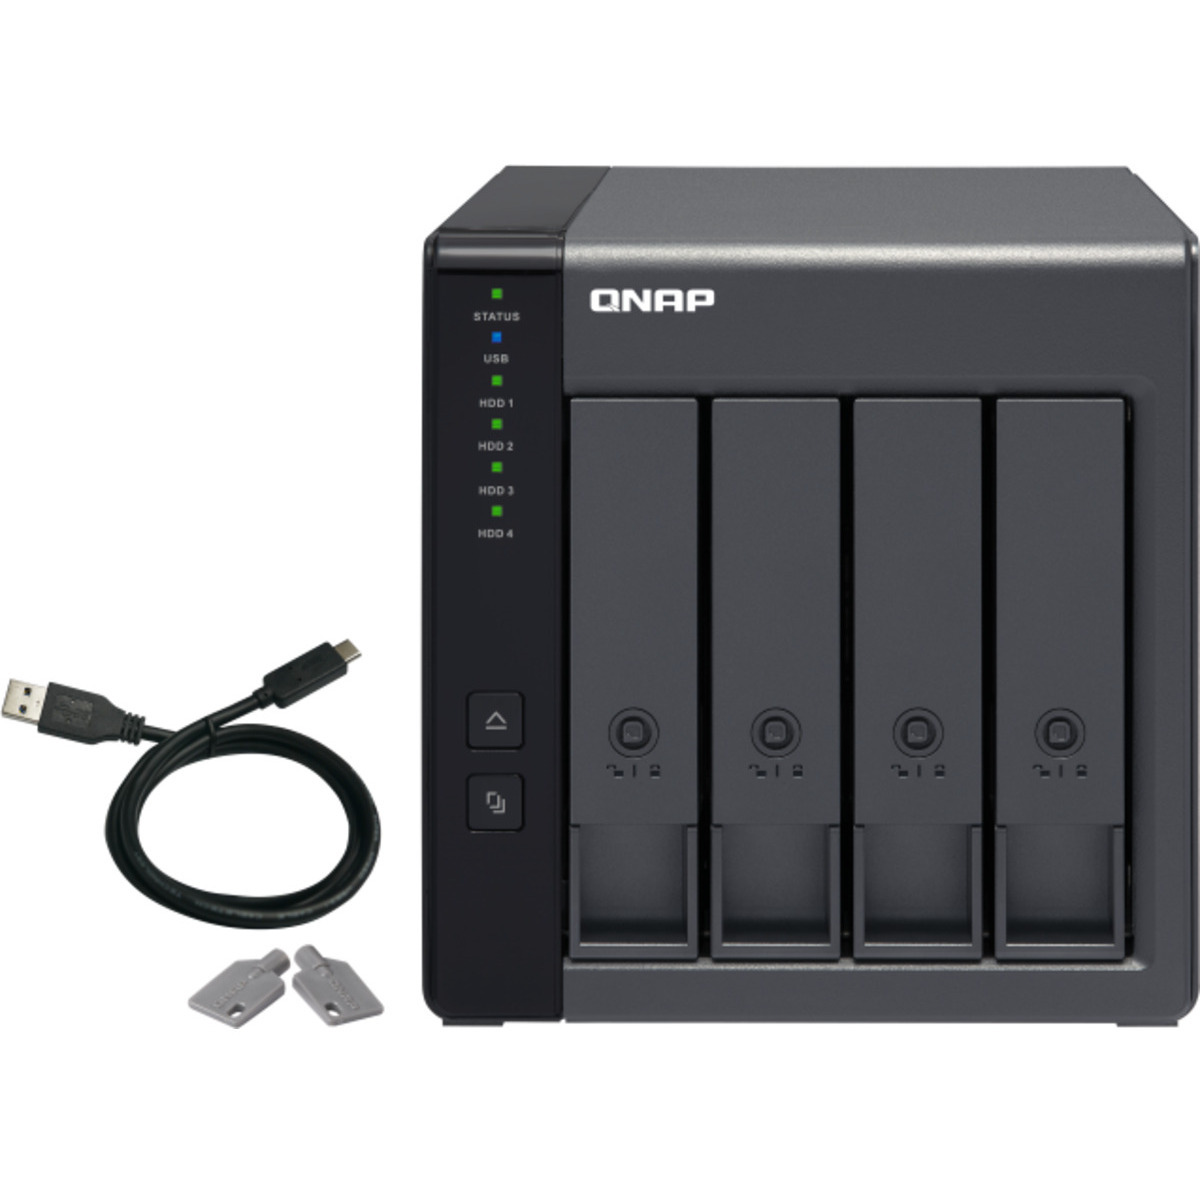 QNAP TR-004 External Expansion Drive 72tb 4-Bay Desktop Multimedia / Power User / Business Expansion Enclosure 3x24tb Western Digital Ultrastar HC580 SED WUH722424ALE6L1 3.5 7200rpm SATA 6Gb/s HDD ENTERPRISE Class Drives Installed - Burn-In Tested TR-004 External Expansion Drive